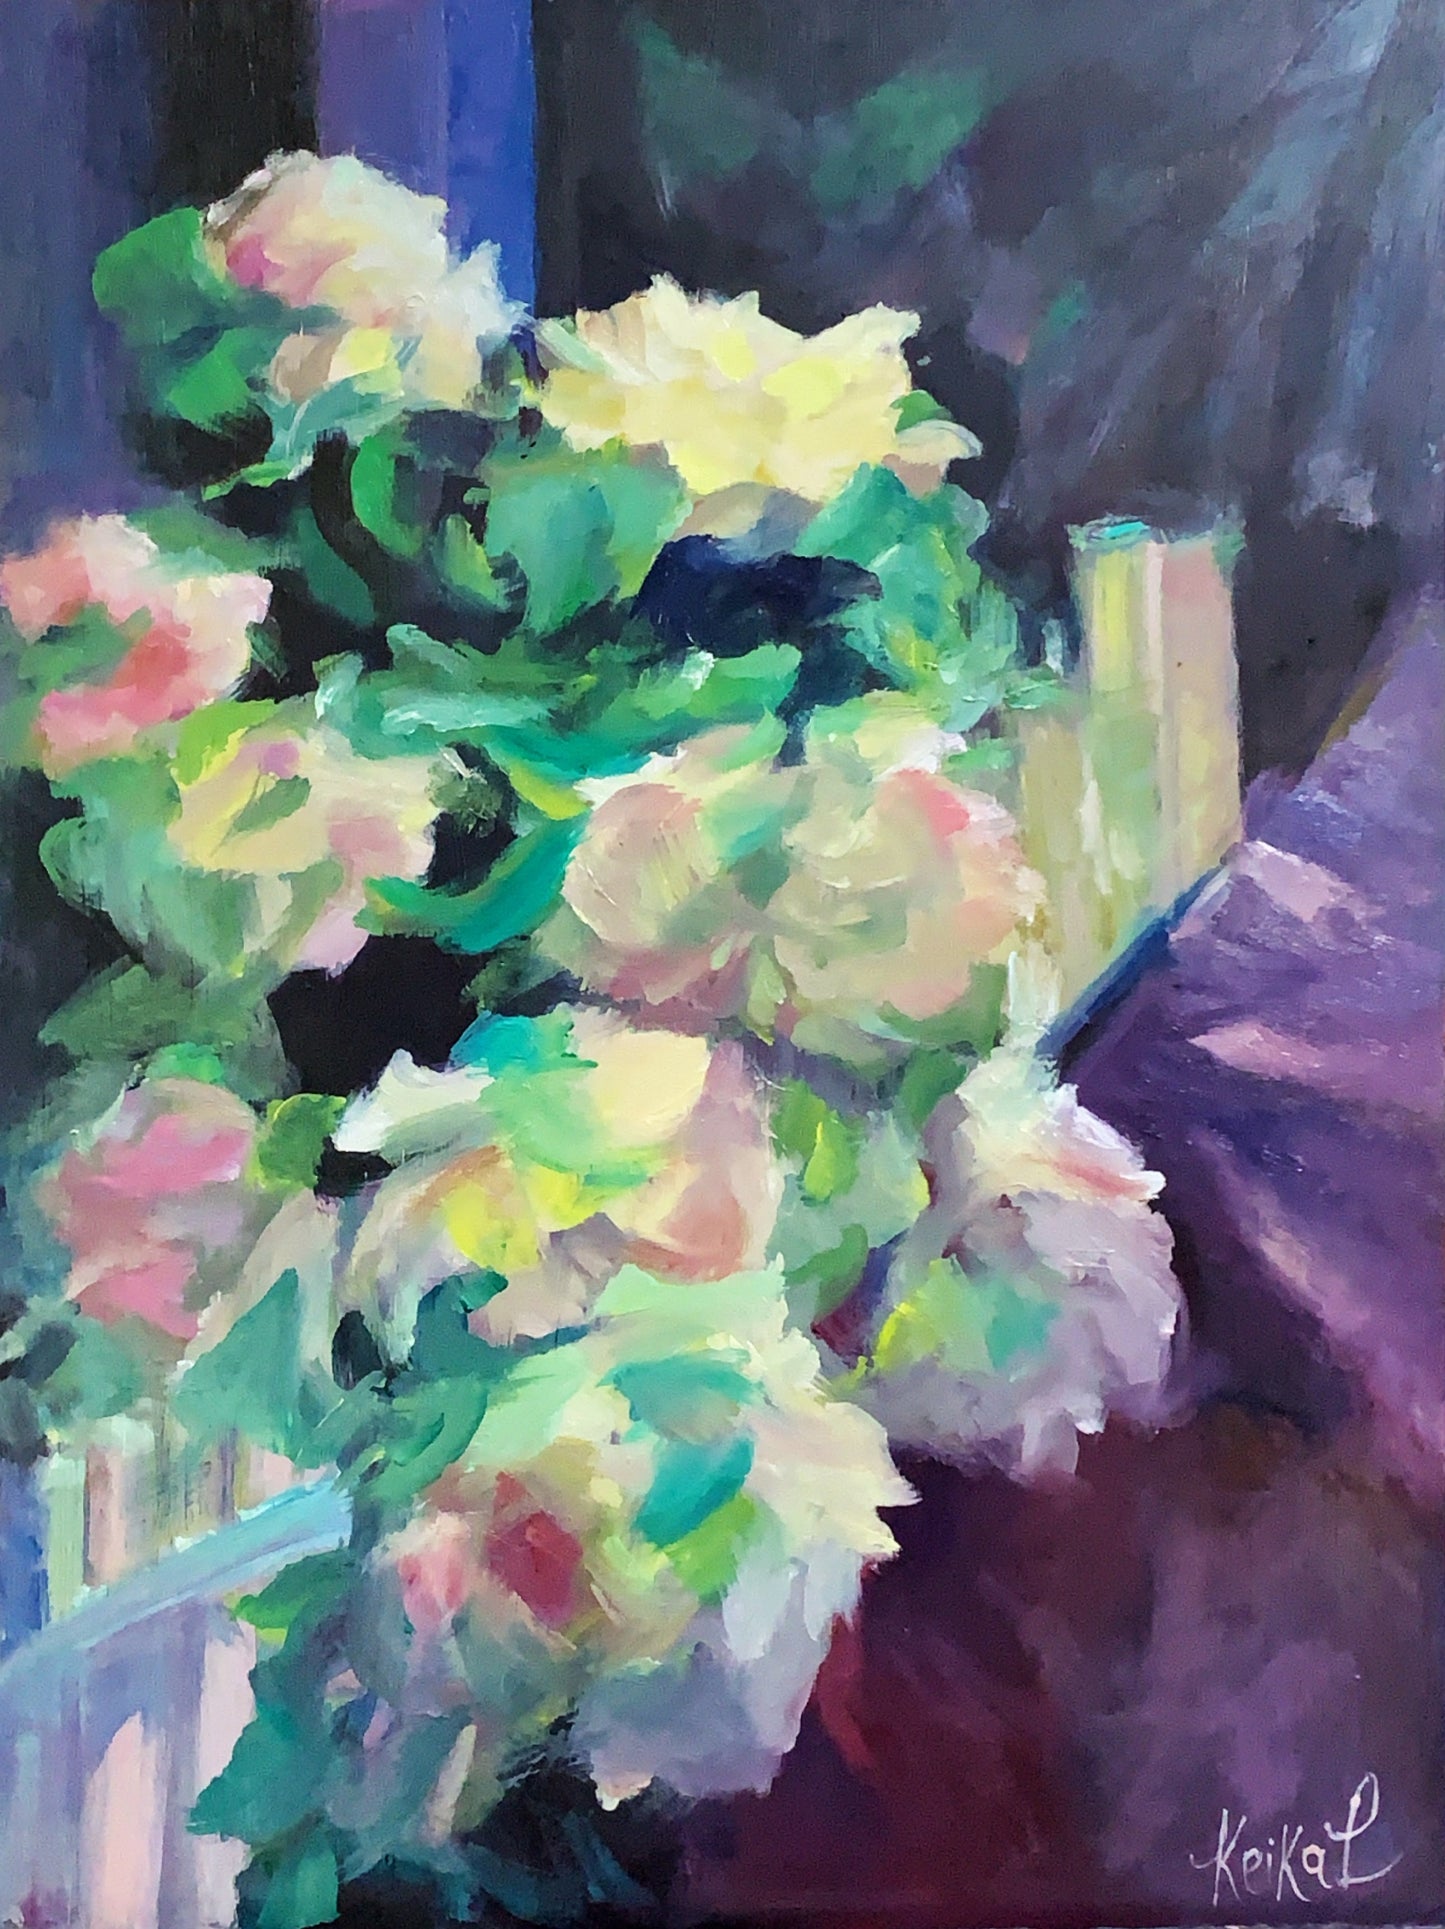 ROSES ON FENCE - Oil Painting - 16"x14"., on  wood board